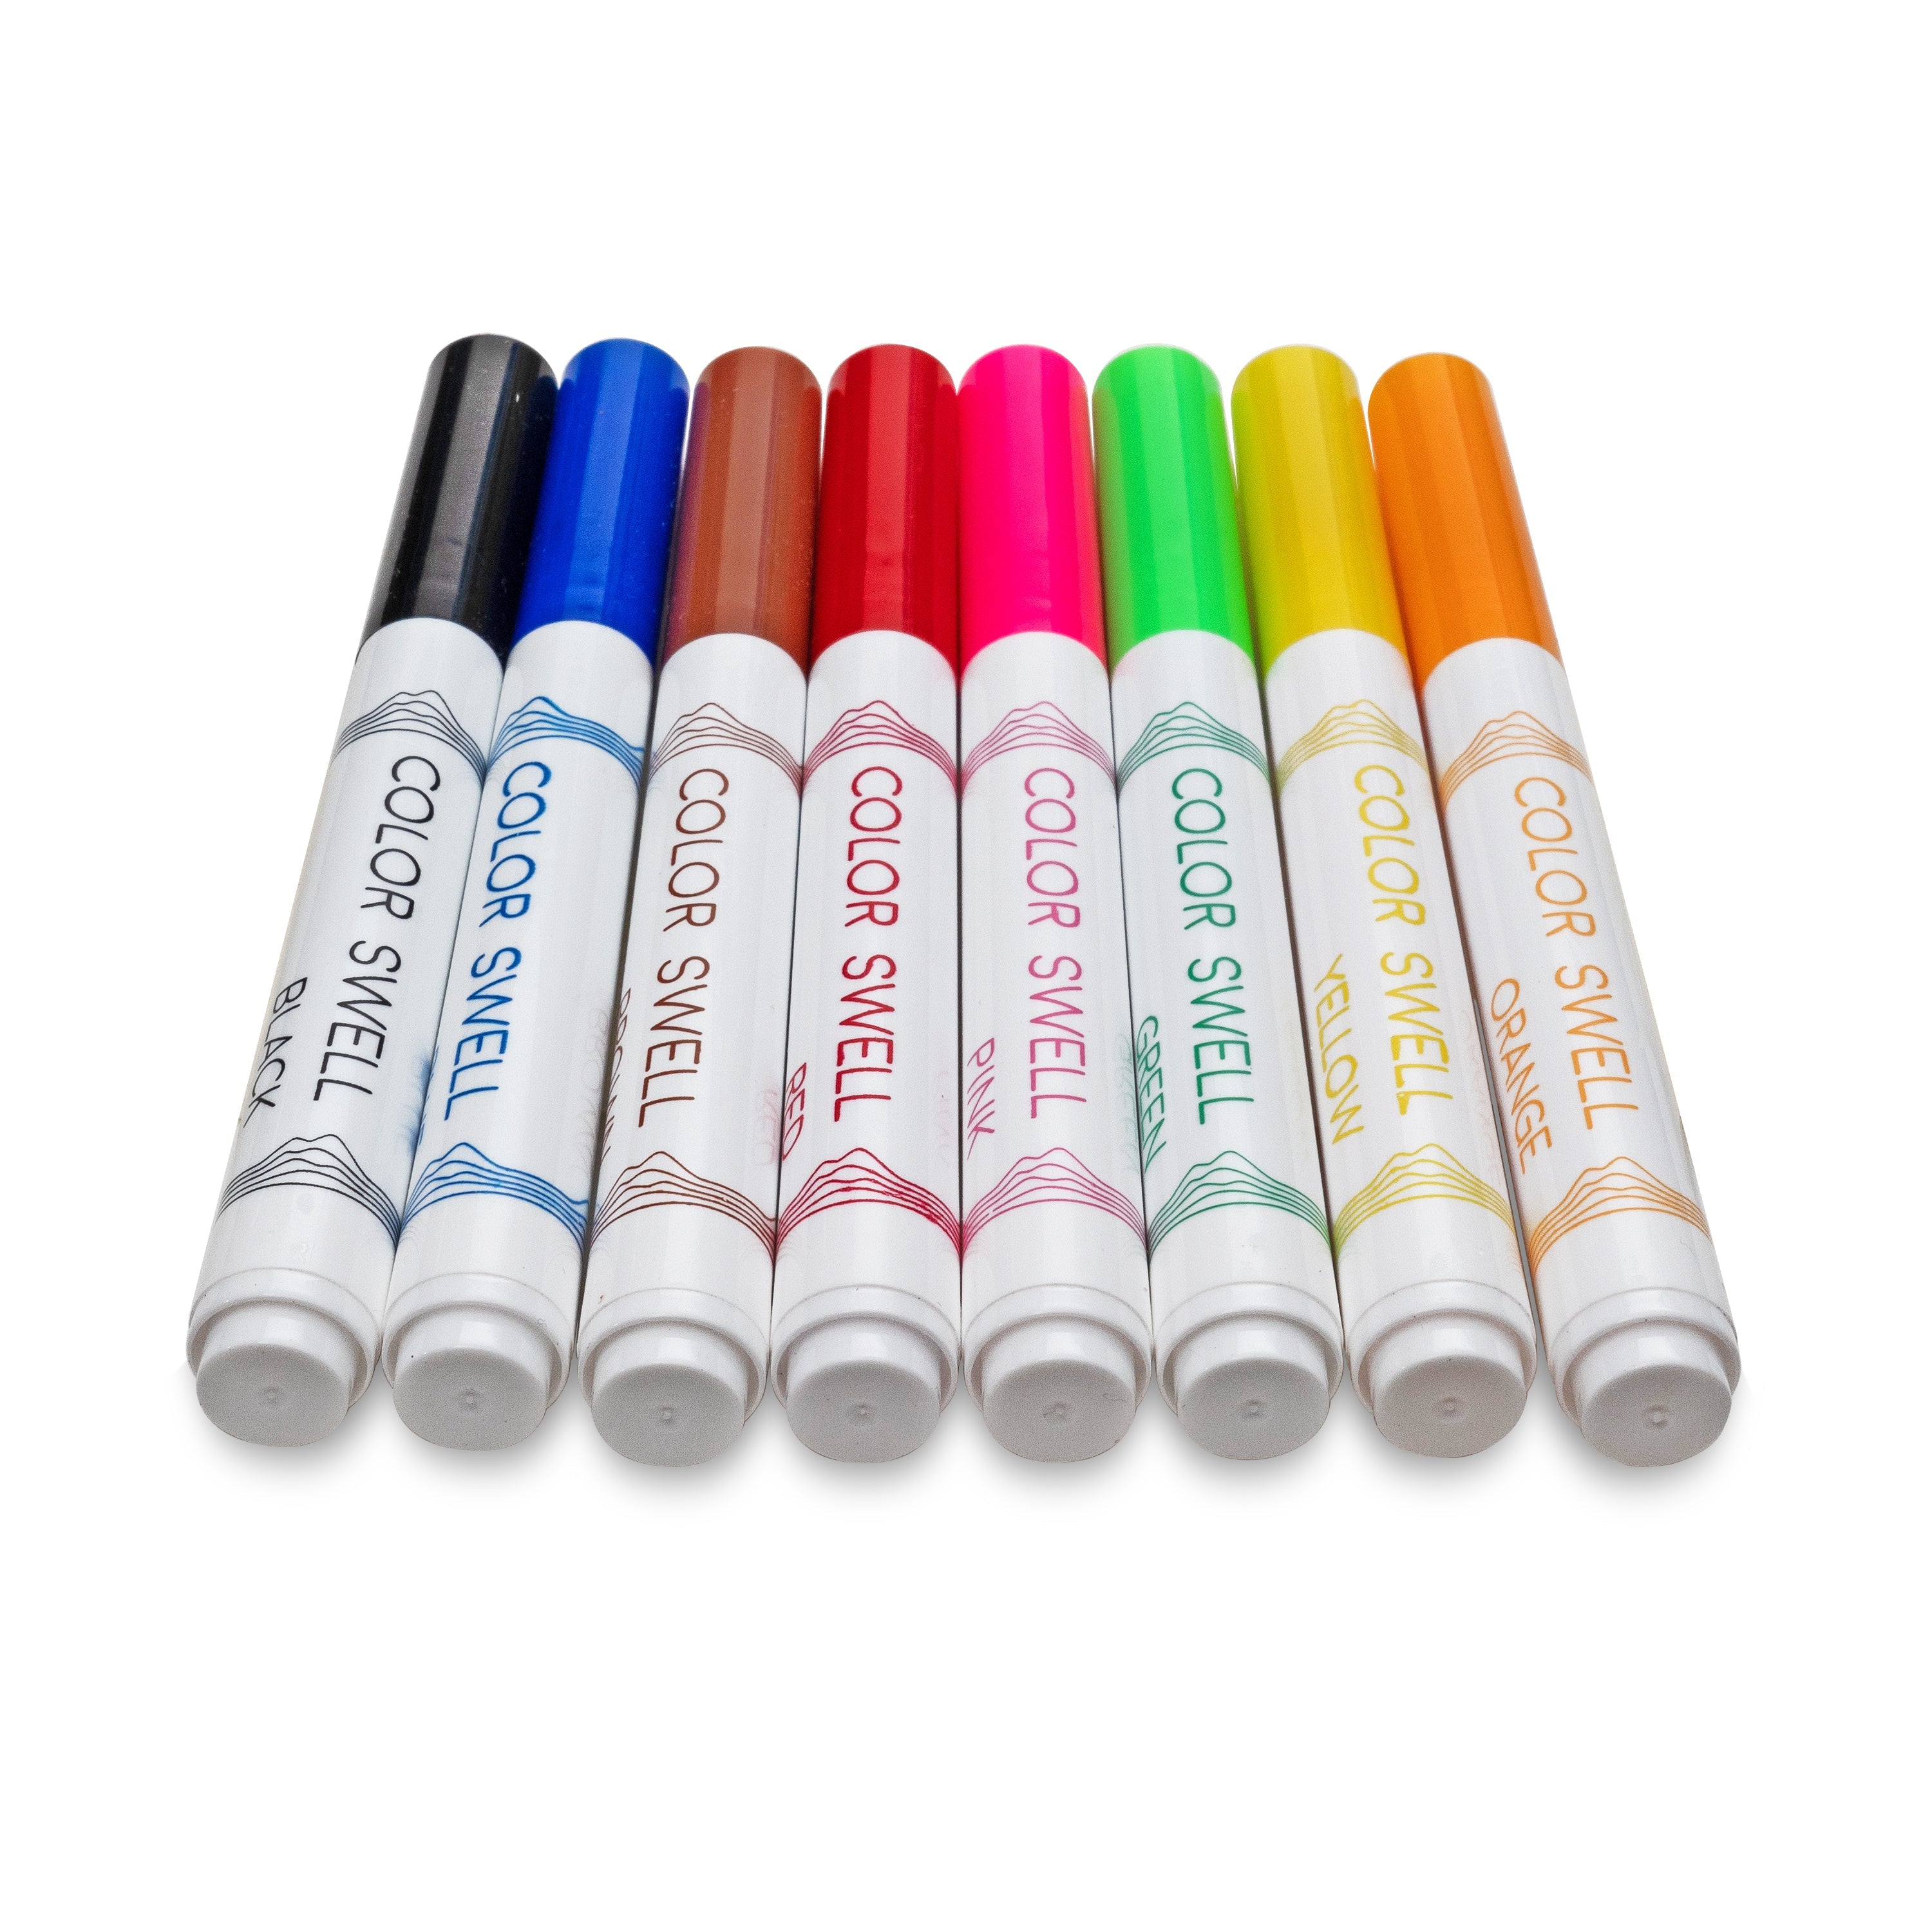 Color Swell Bulk Marker Pack (18 Packs, 8 Markers/Pack) Color Swell